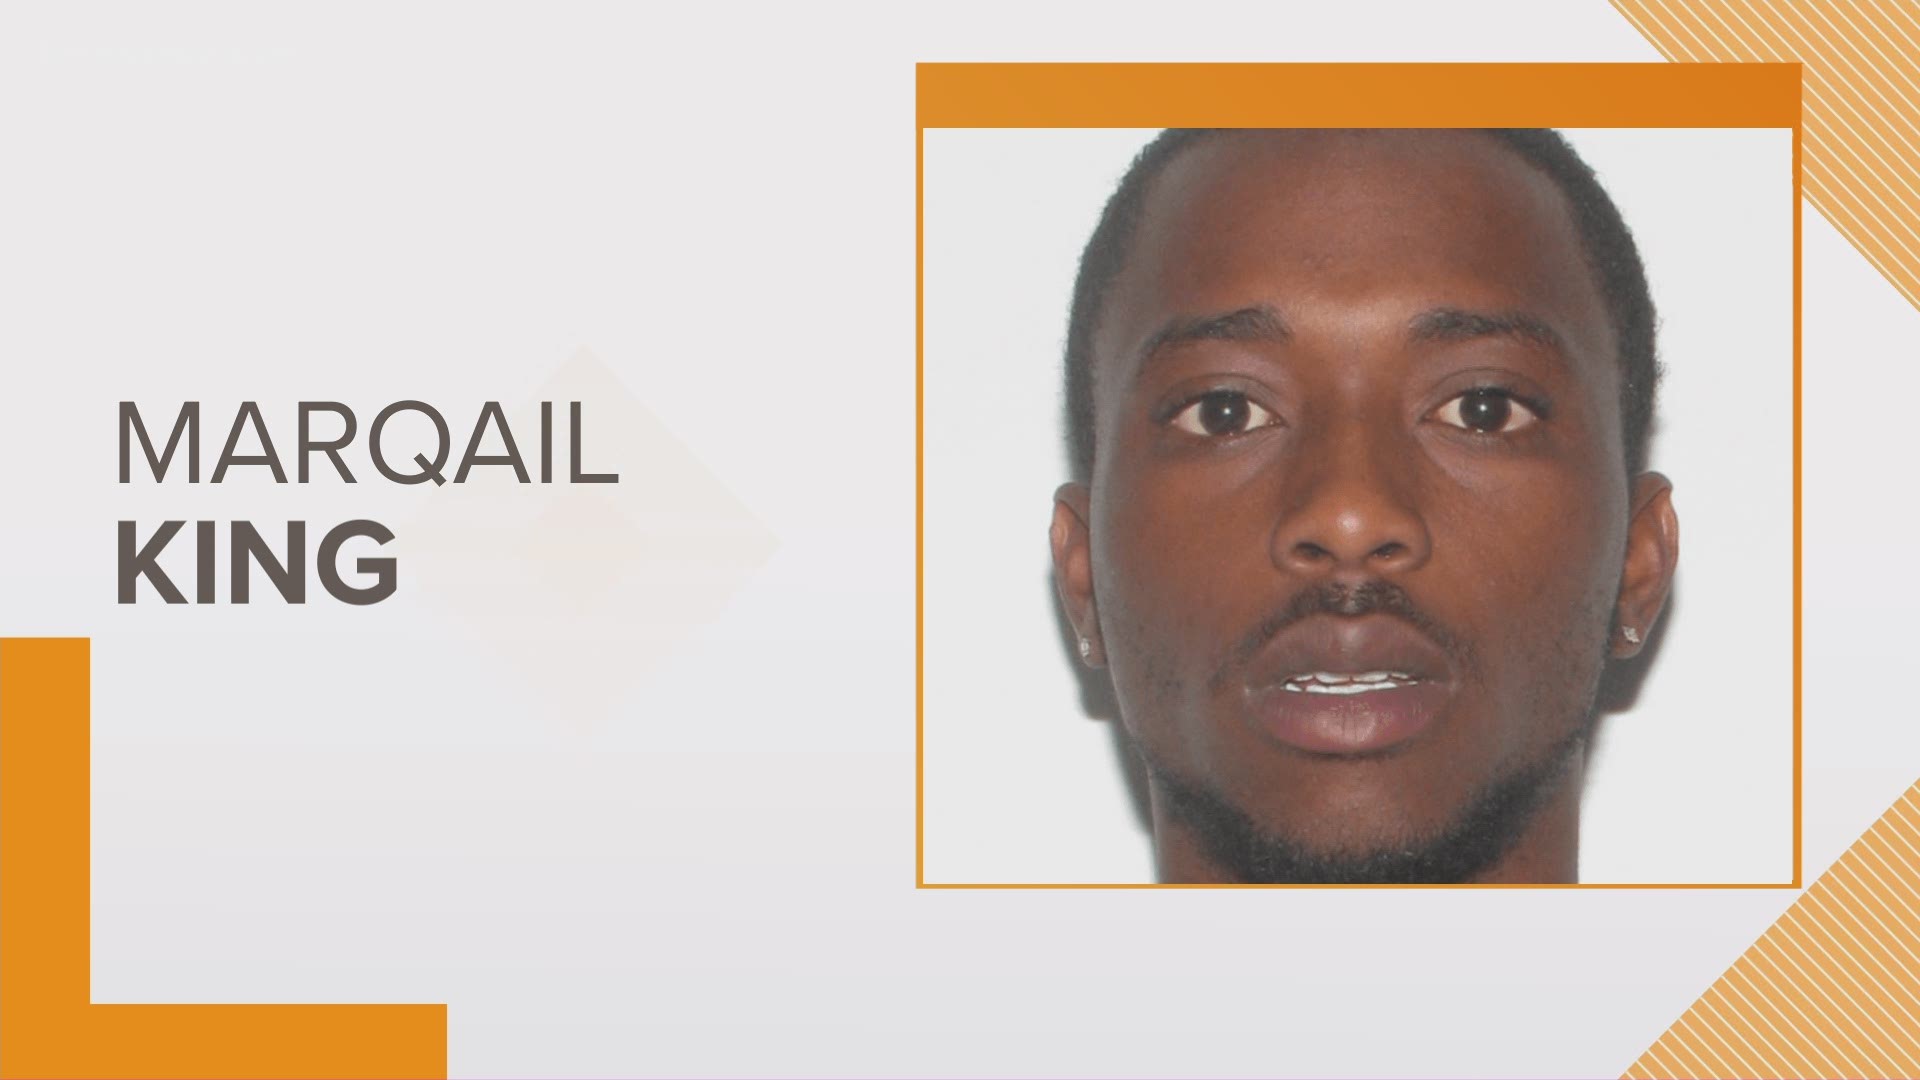 The Norfolk Police Department said Marqail King, 25, is wanted for a deadly shooting that took place on Granby Street on Nov. 18, 2020.